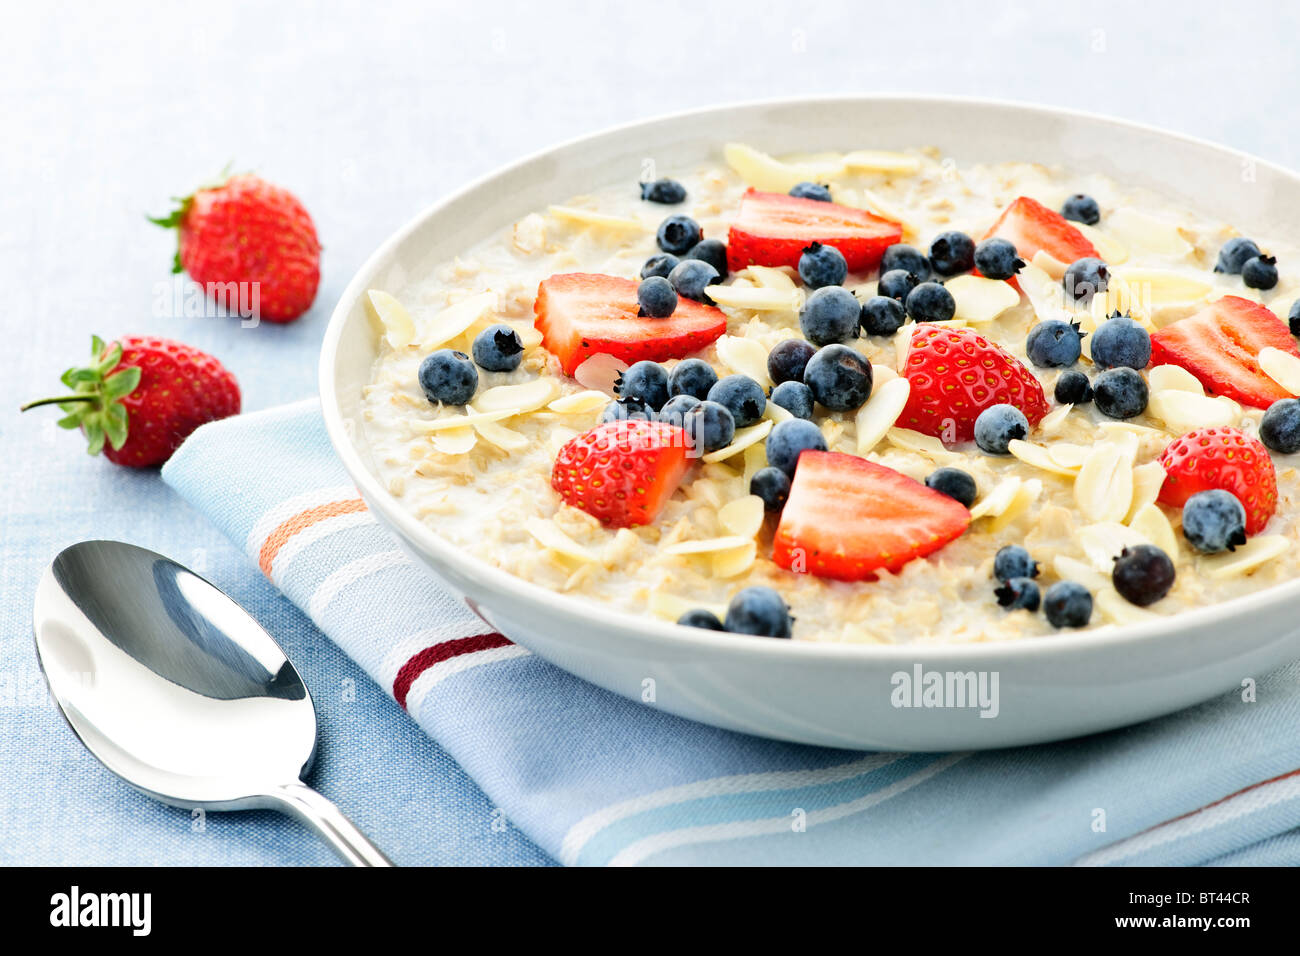 Bowl of hot oatmeal breakfast cereal with fresh berries Stock Photo